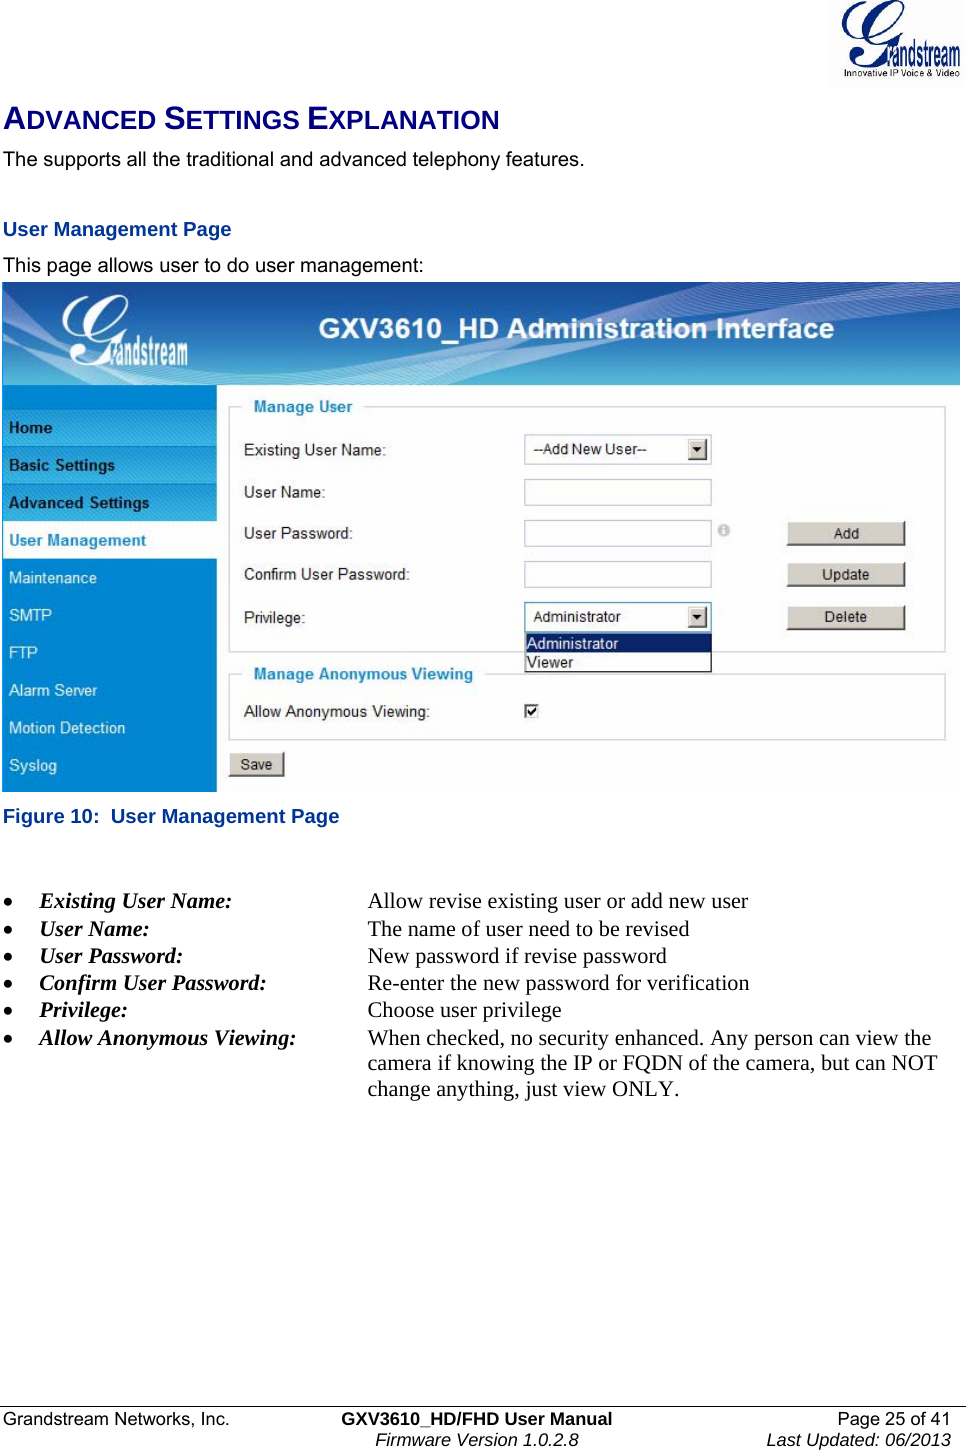  Grandstream Networks, Inc.  GXV3610_HD/FHD User Manual  Page 25 of 41    Firmware Version 1.0.2.8  Last Updated: 06/2013  ADVANCED SETTINGS EXPLANATION The supports all the traditional and advanced telephony features.     User Management Page  This page allows user to do user management:  Figure 10:  User Management Page  • Existing User Name:     Allow revise existing user or add new user • User Name:      The name of user need to be revised • User Password:       New password if revise password • Confirm User Password:     Re-enter the new password for verification • Privilege:     Choose user privilege • Allow Anonymous Viewing:  When checked, no security enhanced. Any person can view the       camera if knowing the IP or FQDN of the camera, but can NOT            change anything, just view ONLY.    